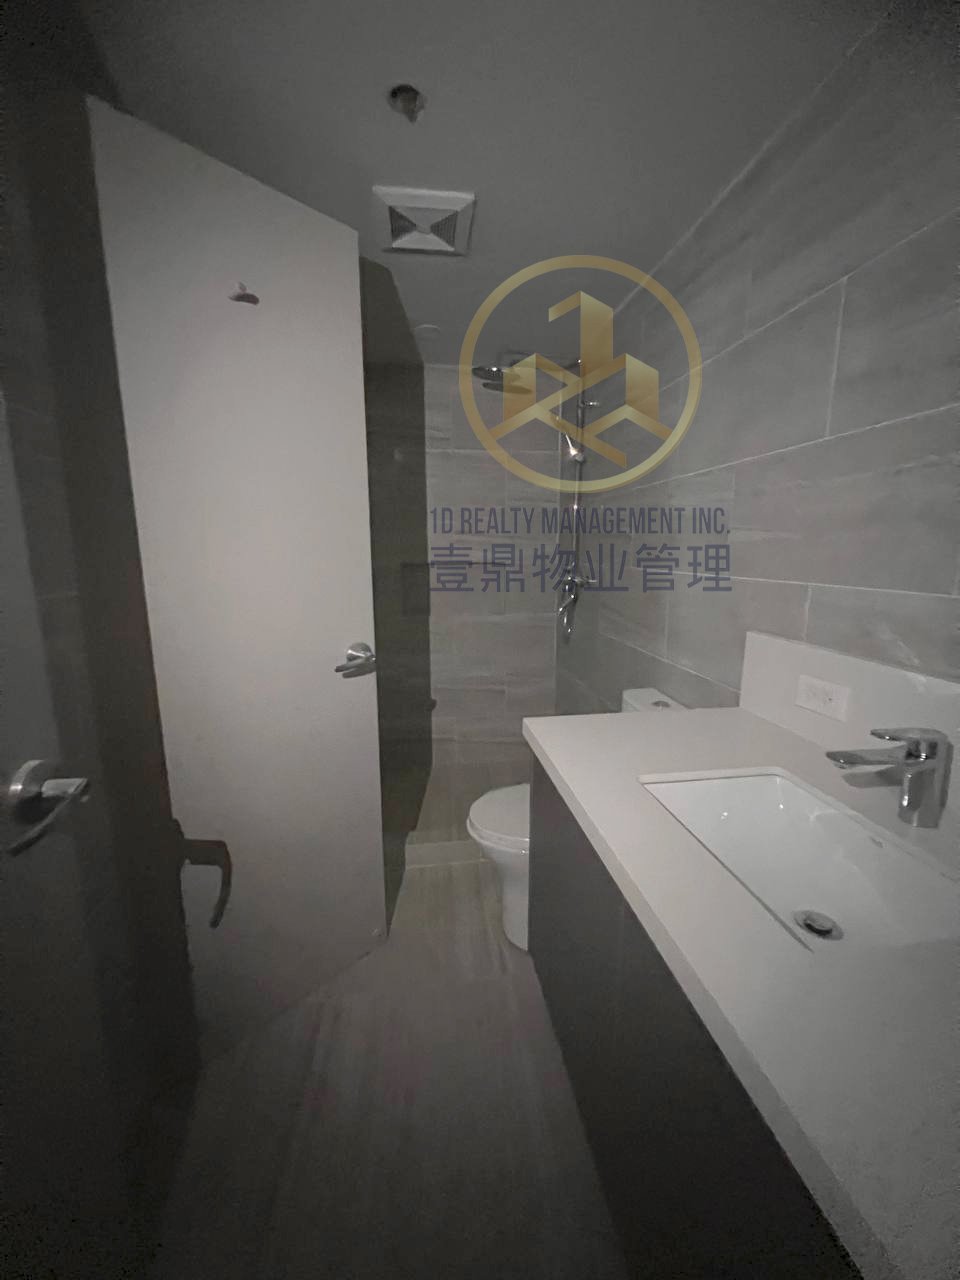 One Salcedo Place Makati City - 2BR For Lease